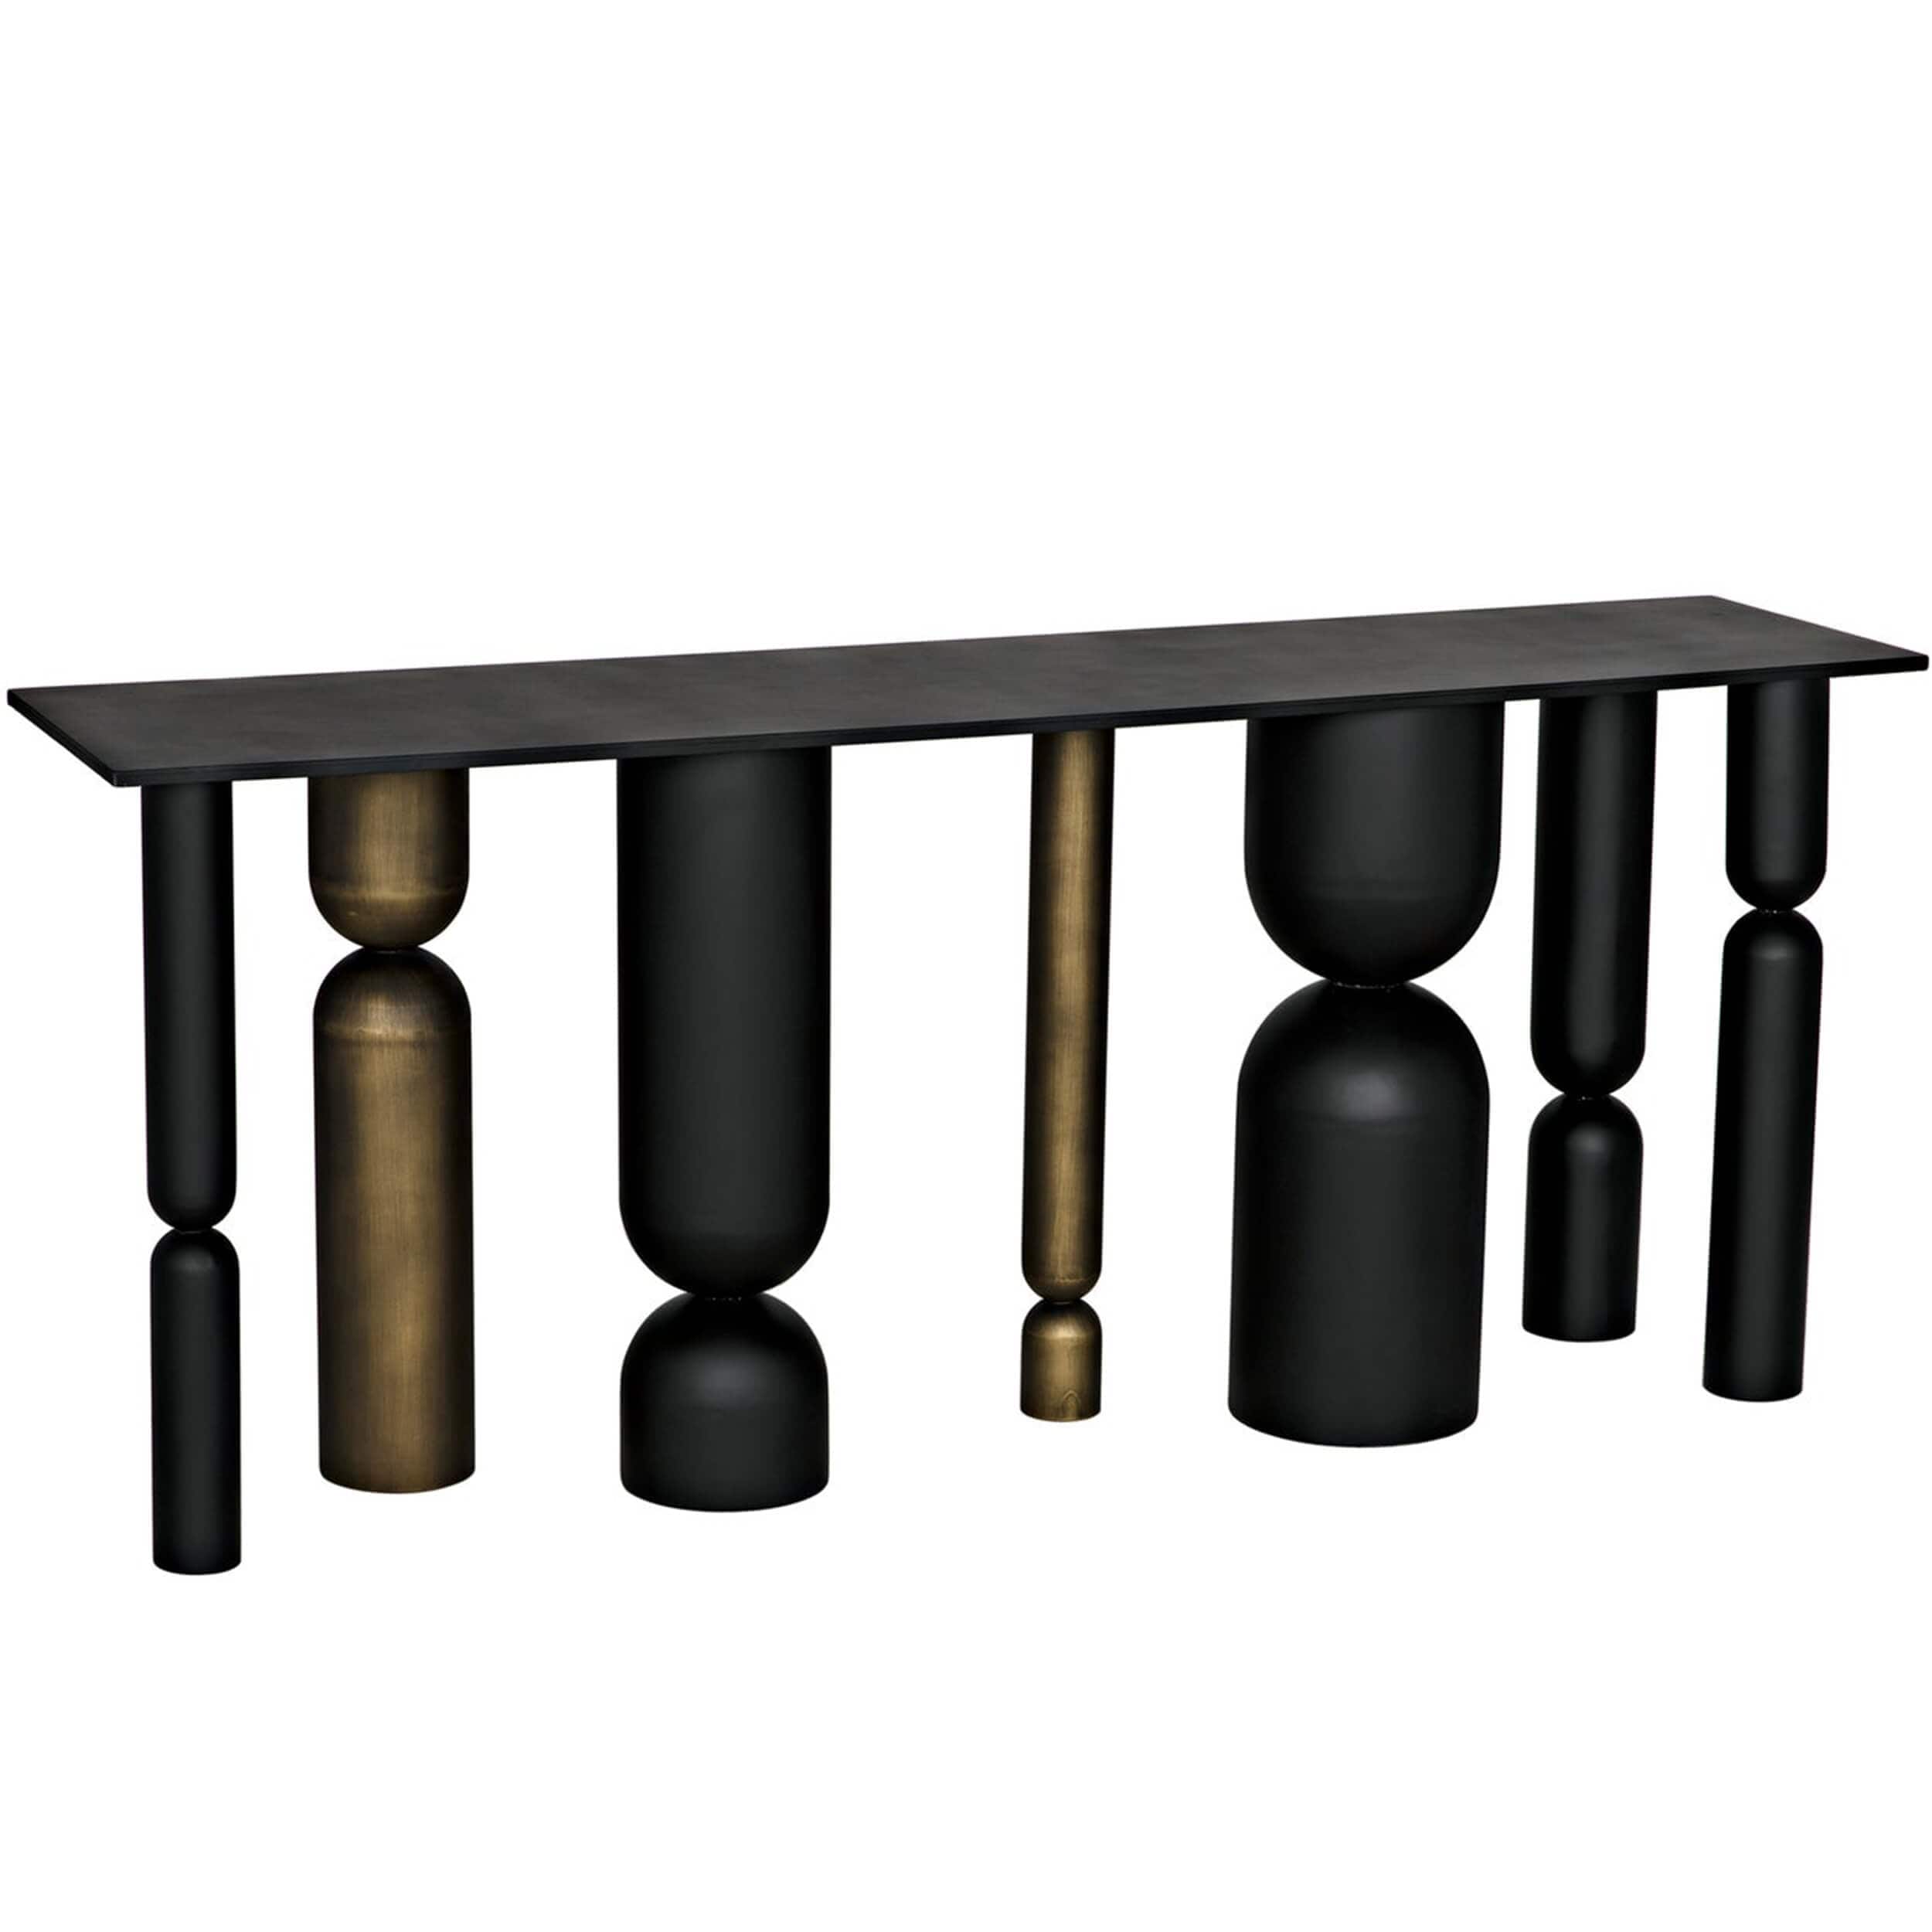 Image of Figaro Console, Matte Black Steel and Aged Brass Finish